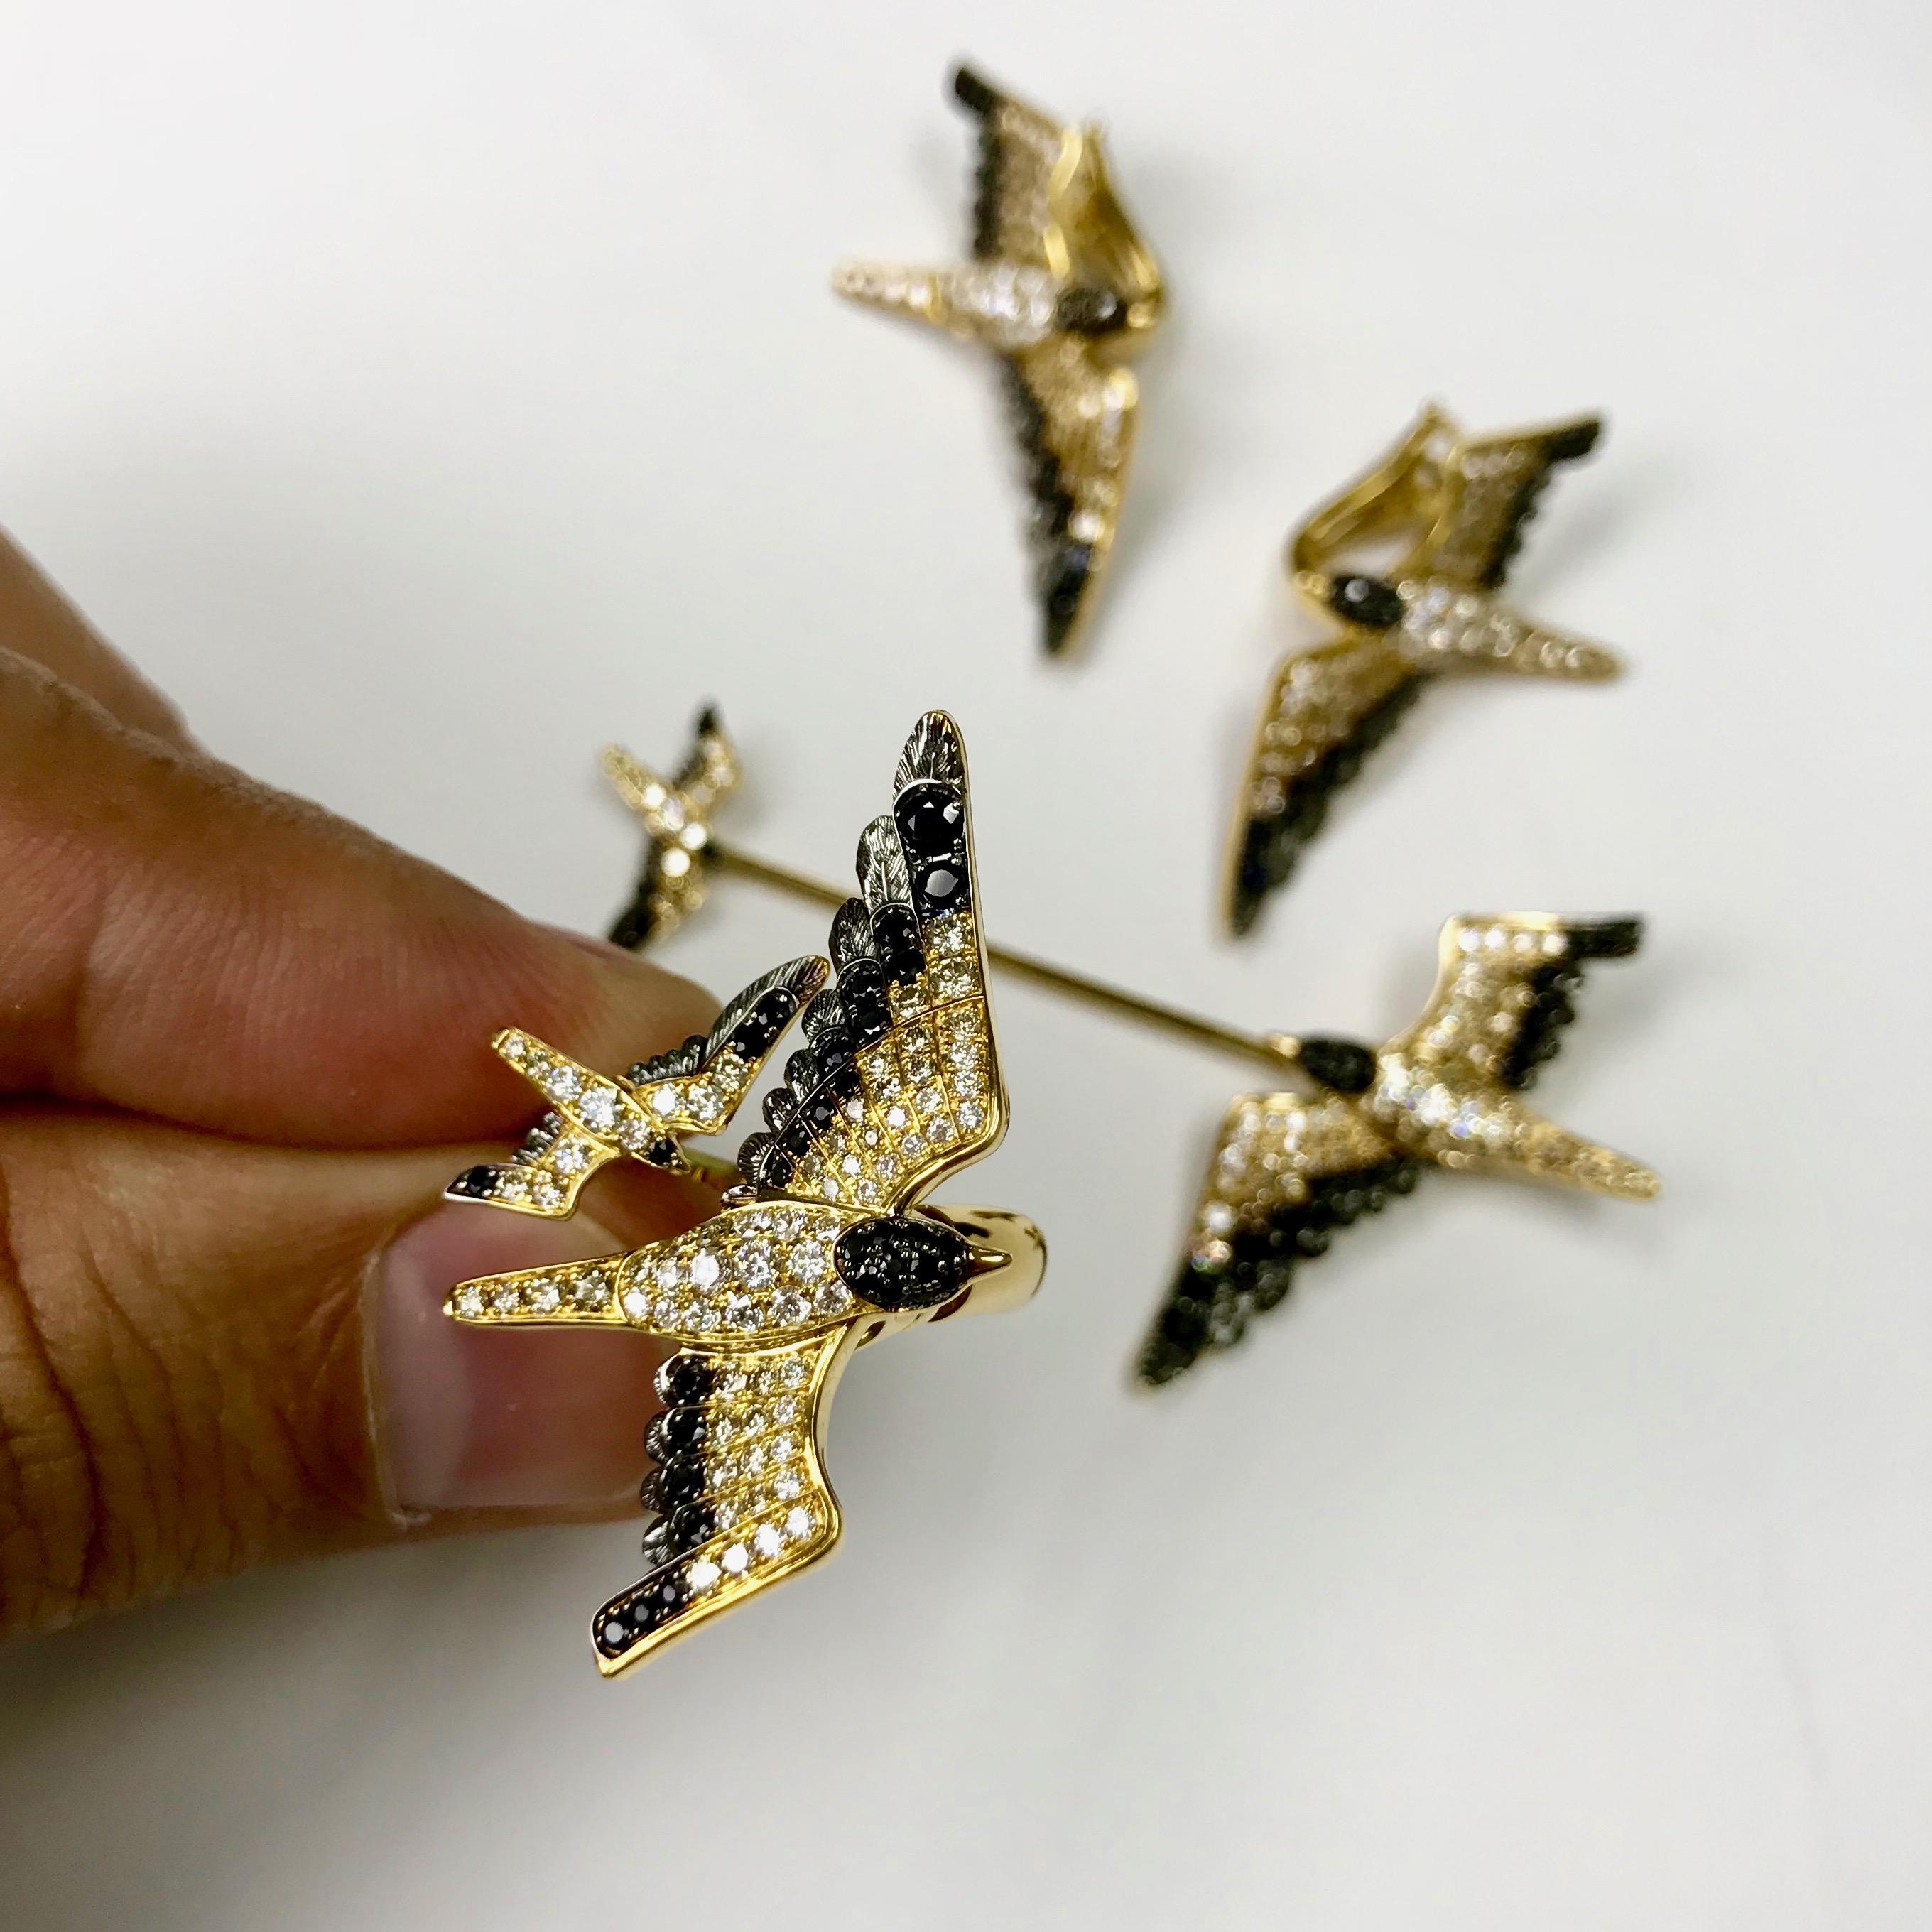 White and Brown Diamonds Black Sapphire 18 Karat Yellow Gold Seagull Suite 
Highly detailed Seagull Suite. Combination of White and Champagne Diamonds gives fully impression that they are alive. Ring suites your finger perfectly. This Pin represents